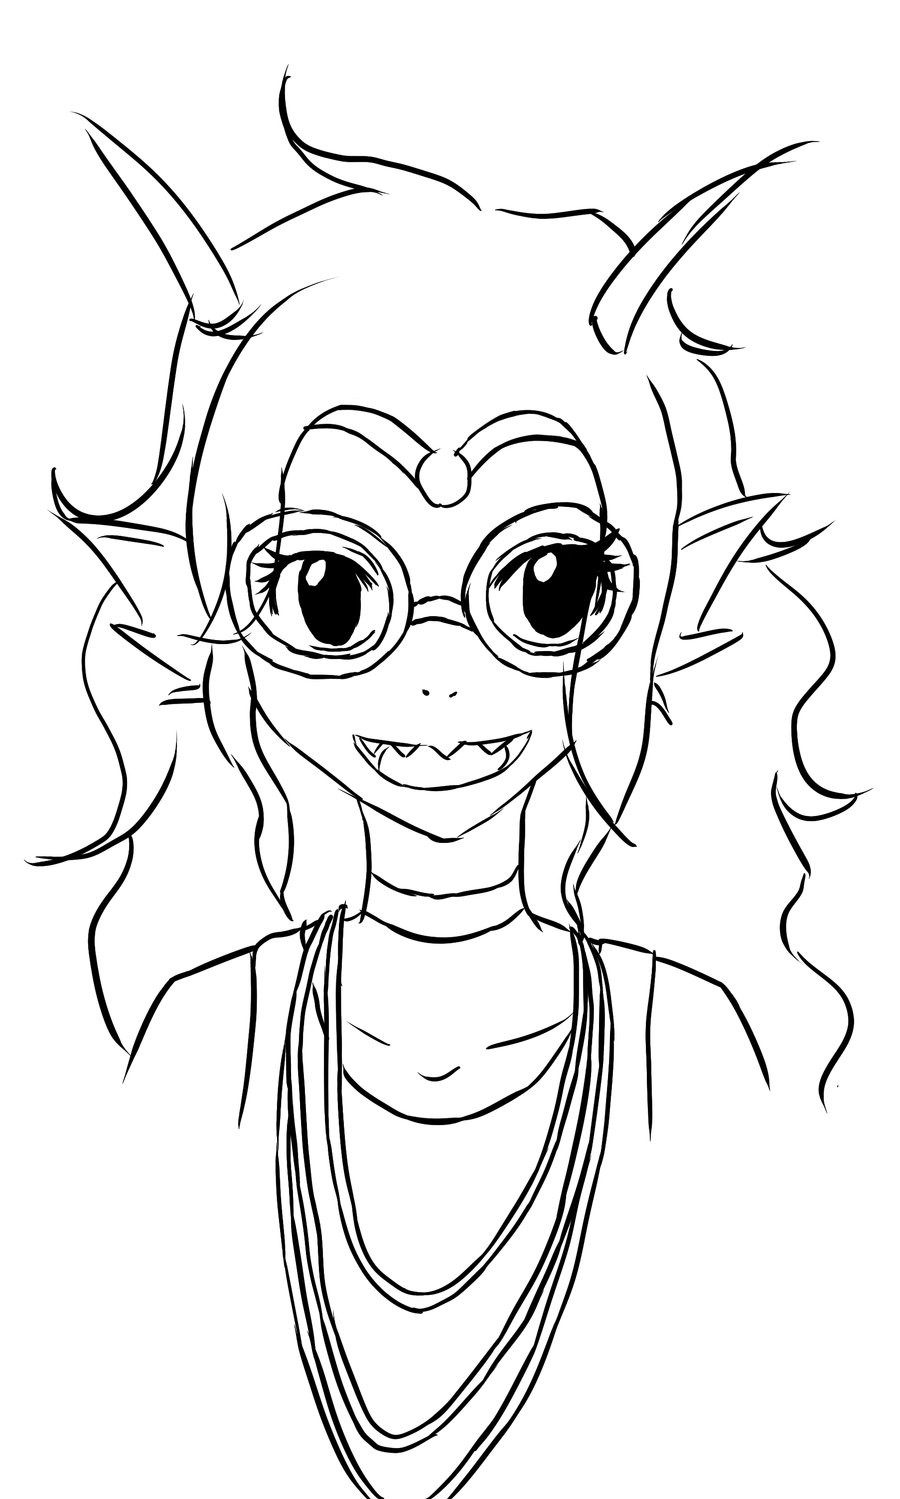 Homestuck Coloring Pages
 Homestuck Feferi Fast Lineart by Kitty Renemi on DeviantArt